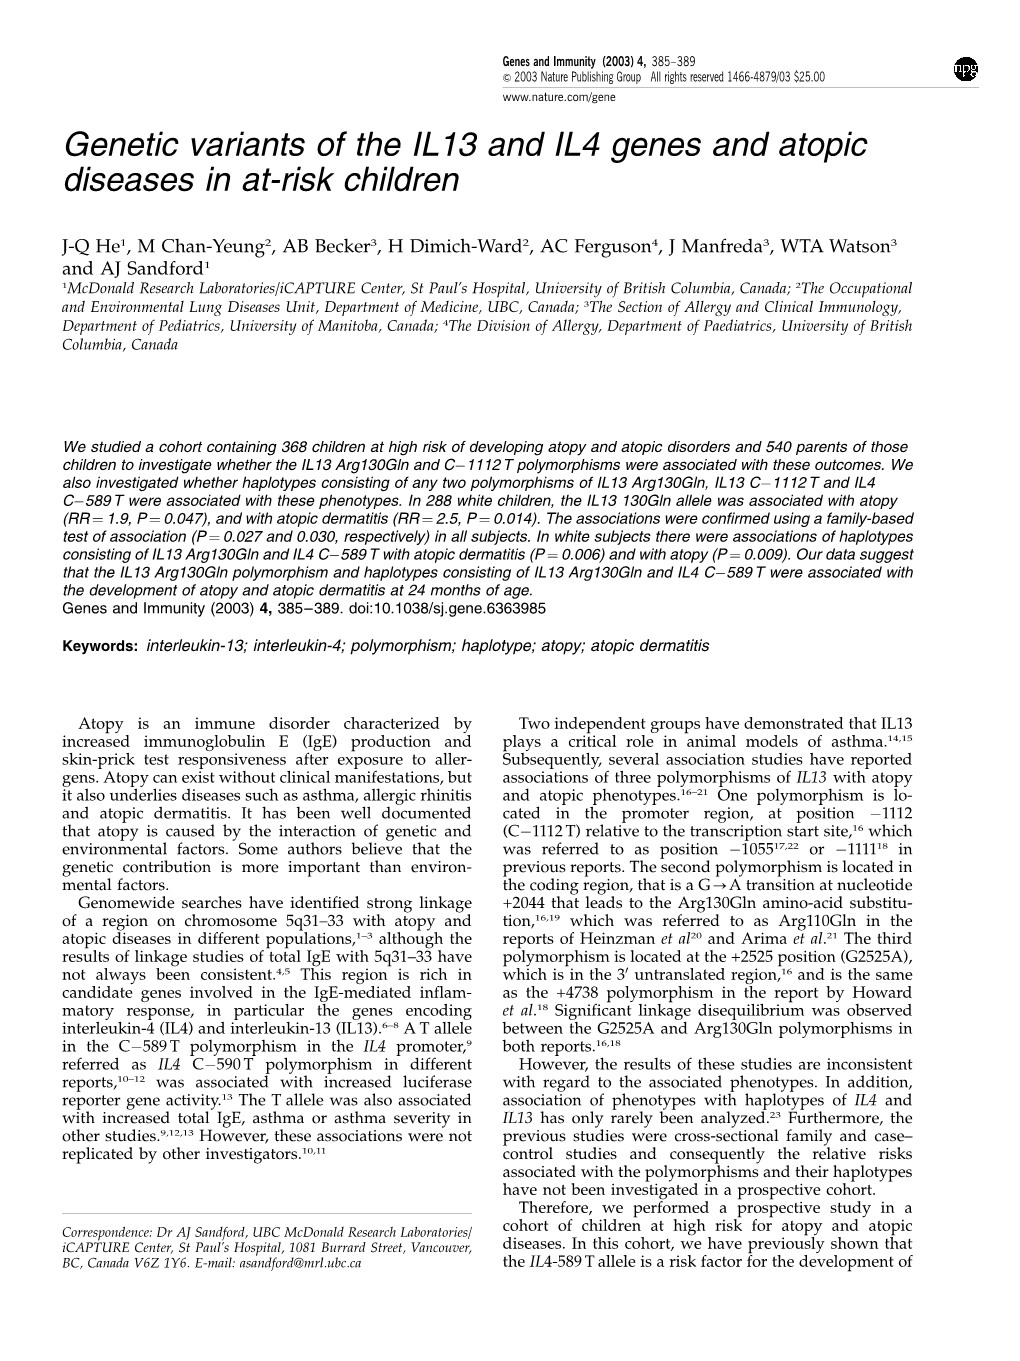 Genetic Variants of the IL13 and IL4 Genes and Atopic Diseases in At-Risk Children